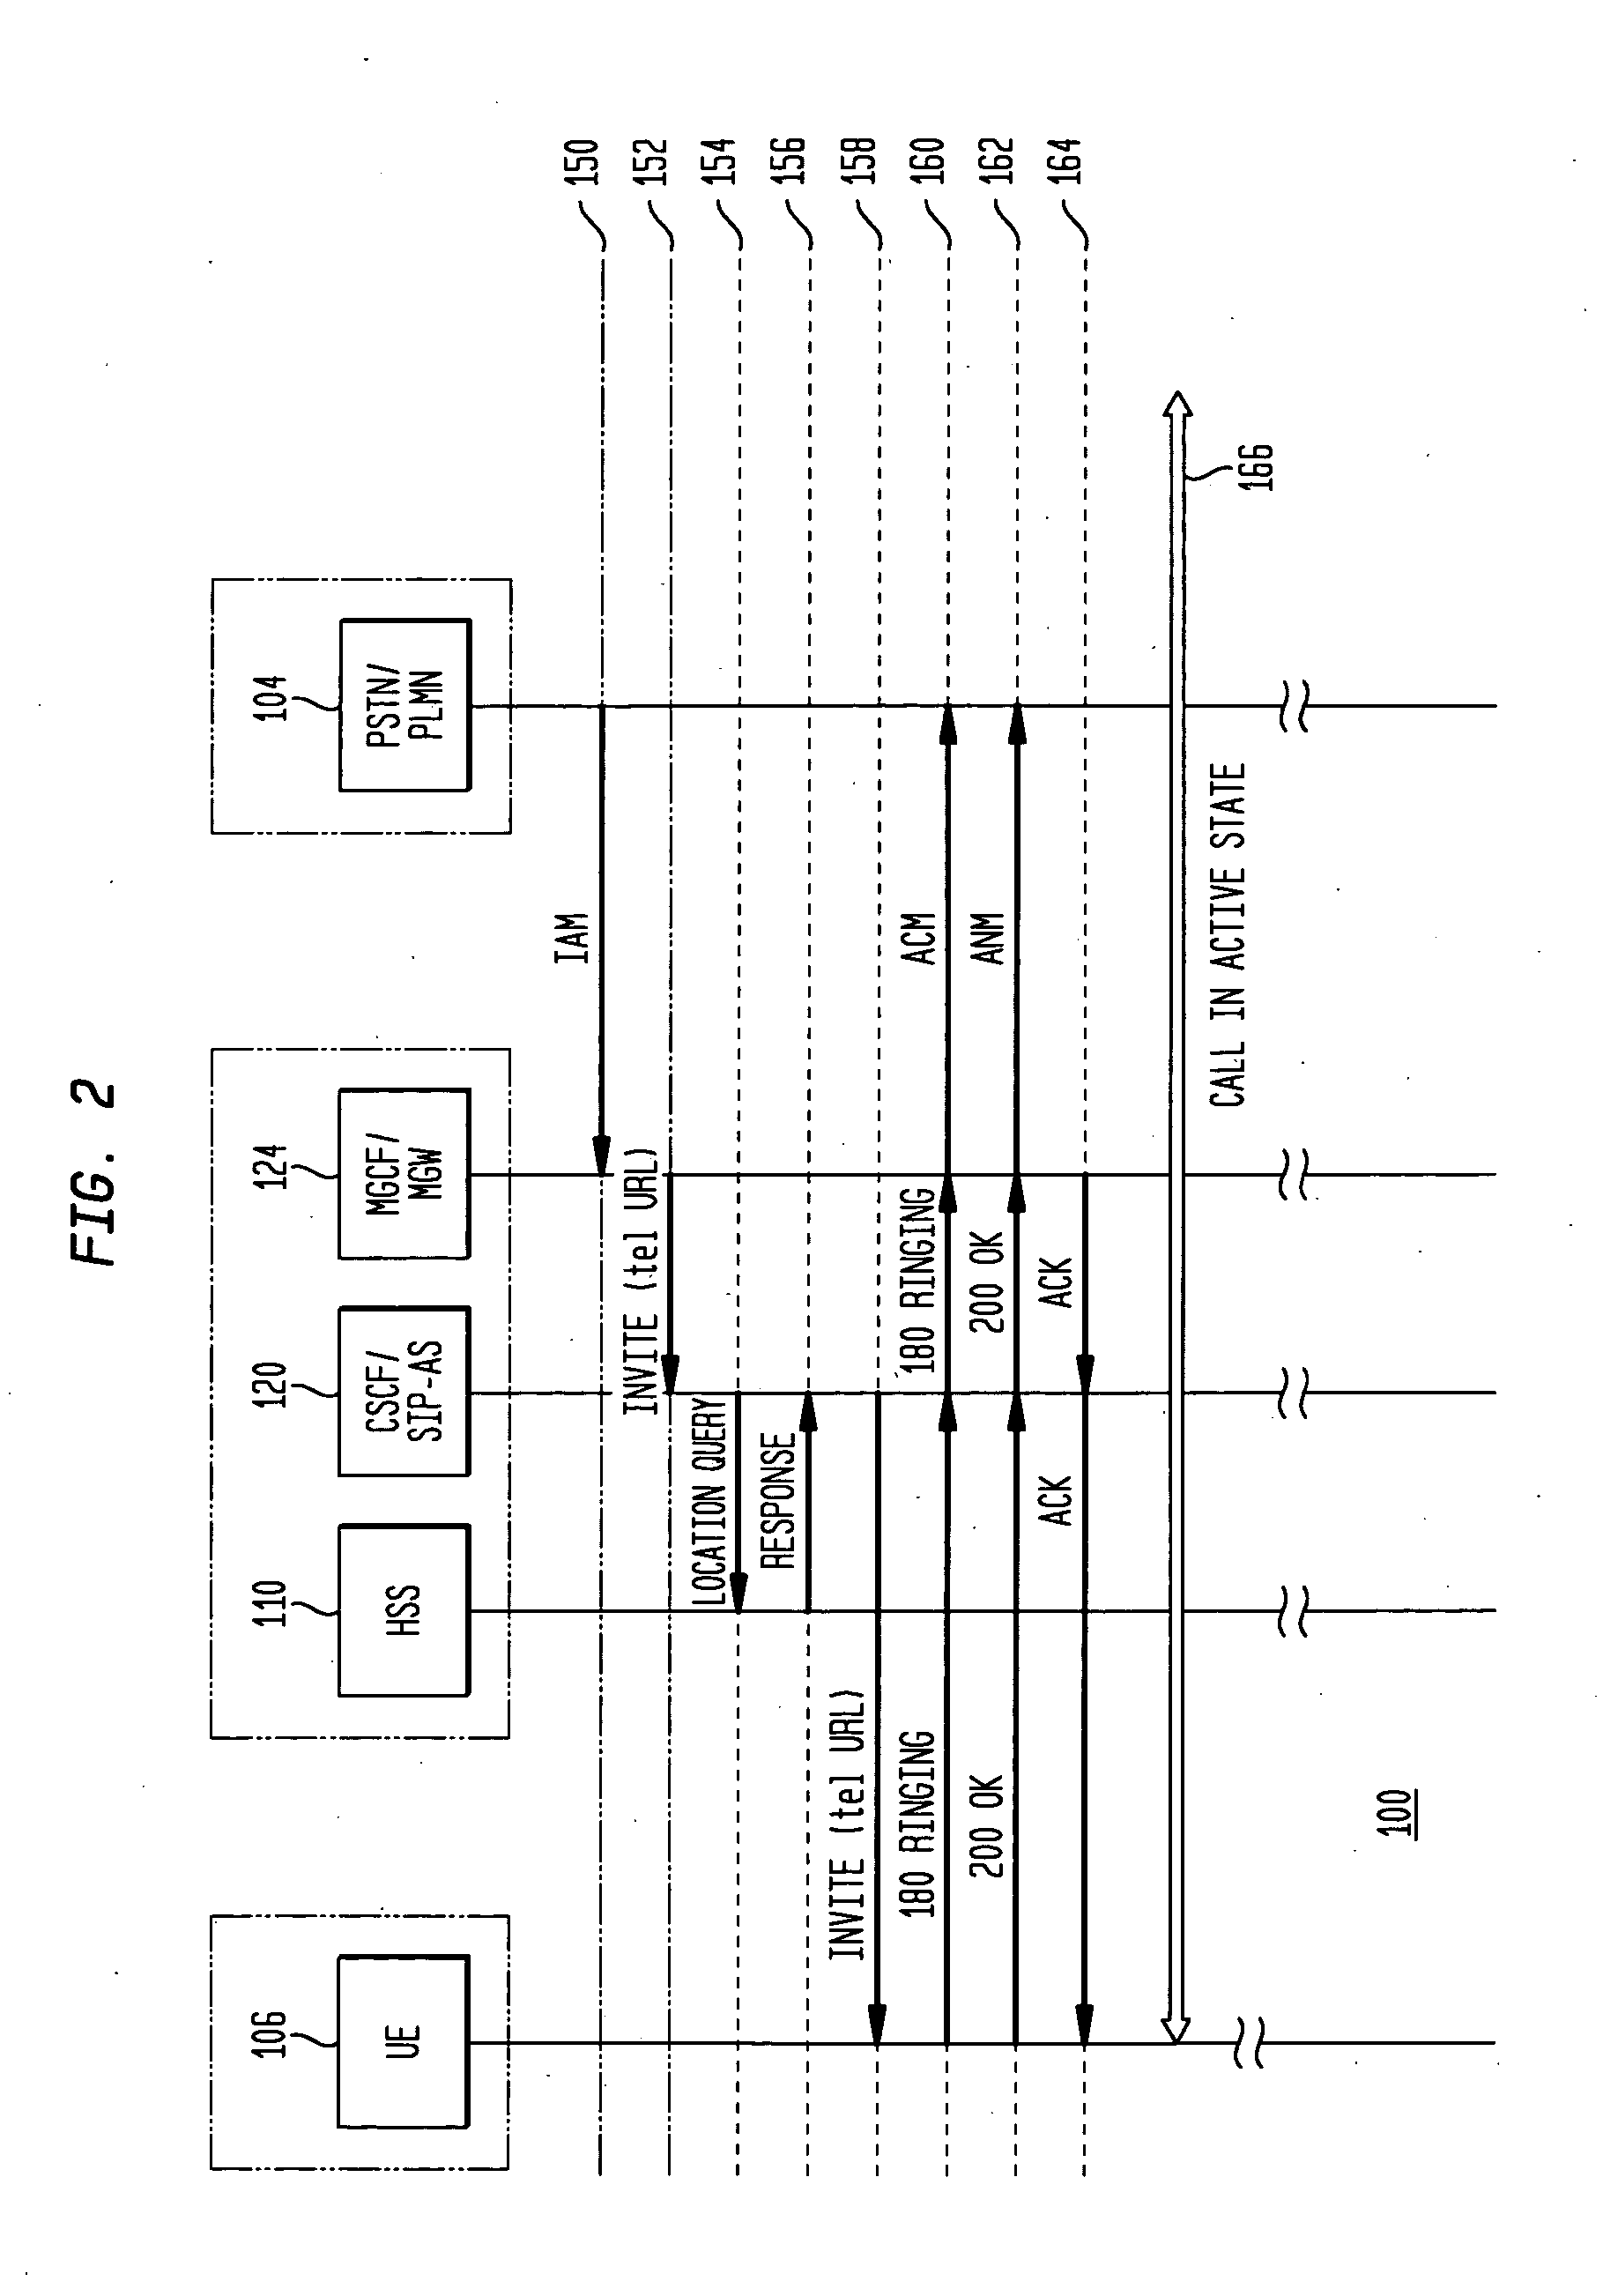 Pseudo number portability in fixed-mobile convergence with one number